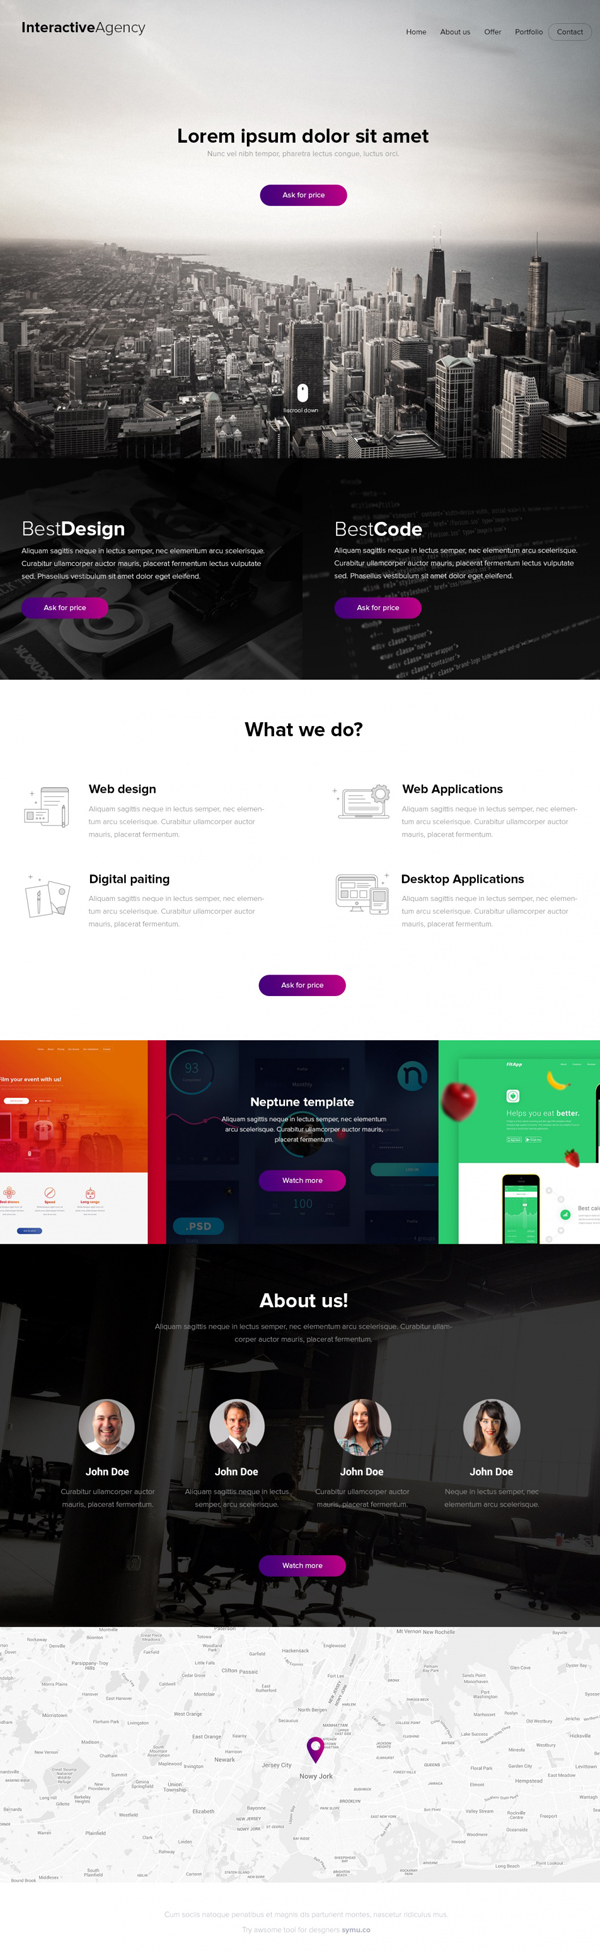 Interactive Agency - PSD template